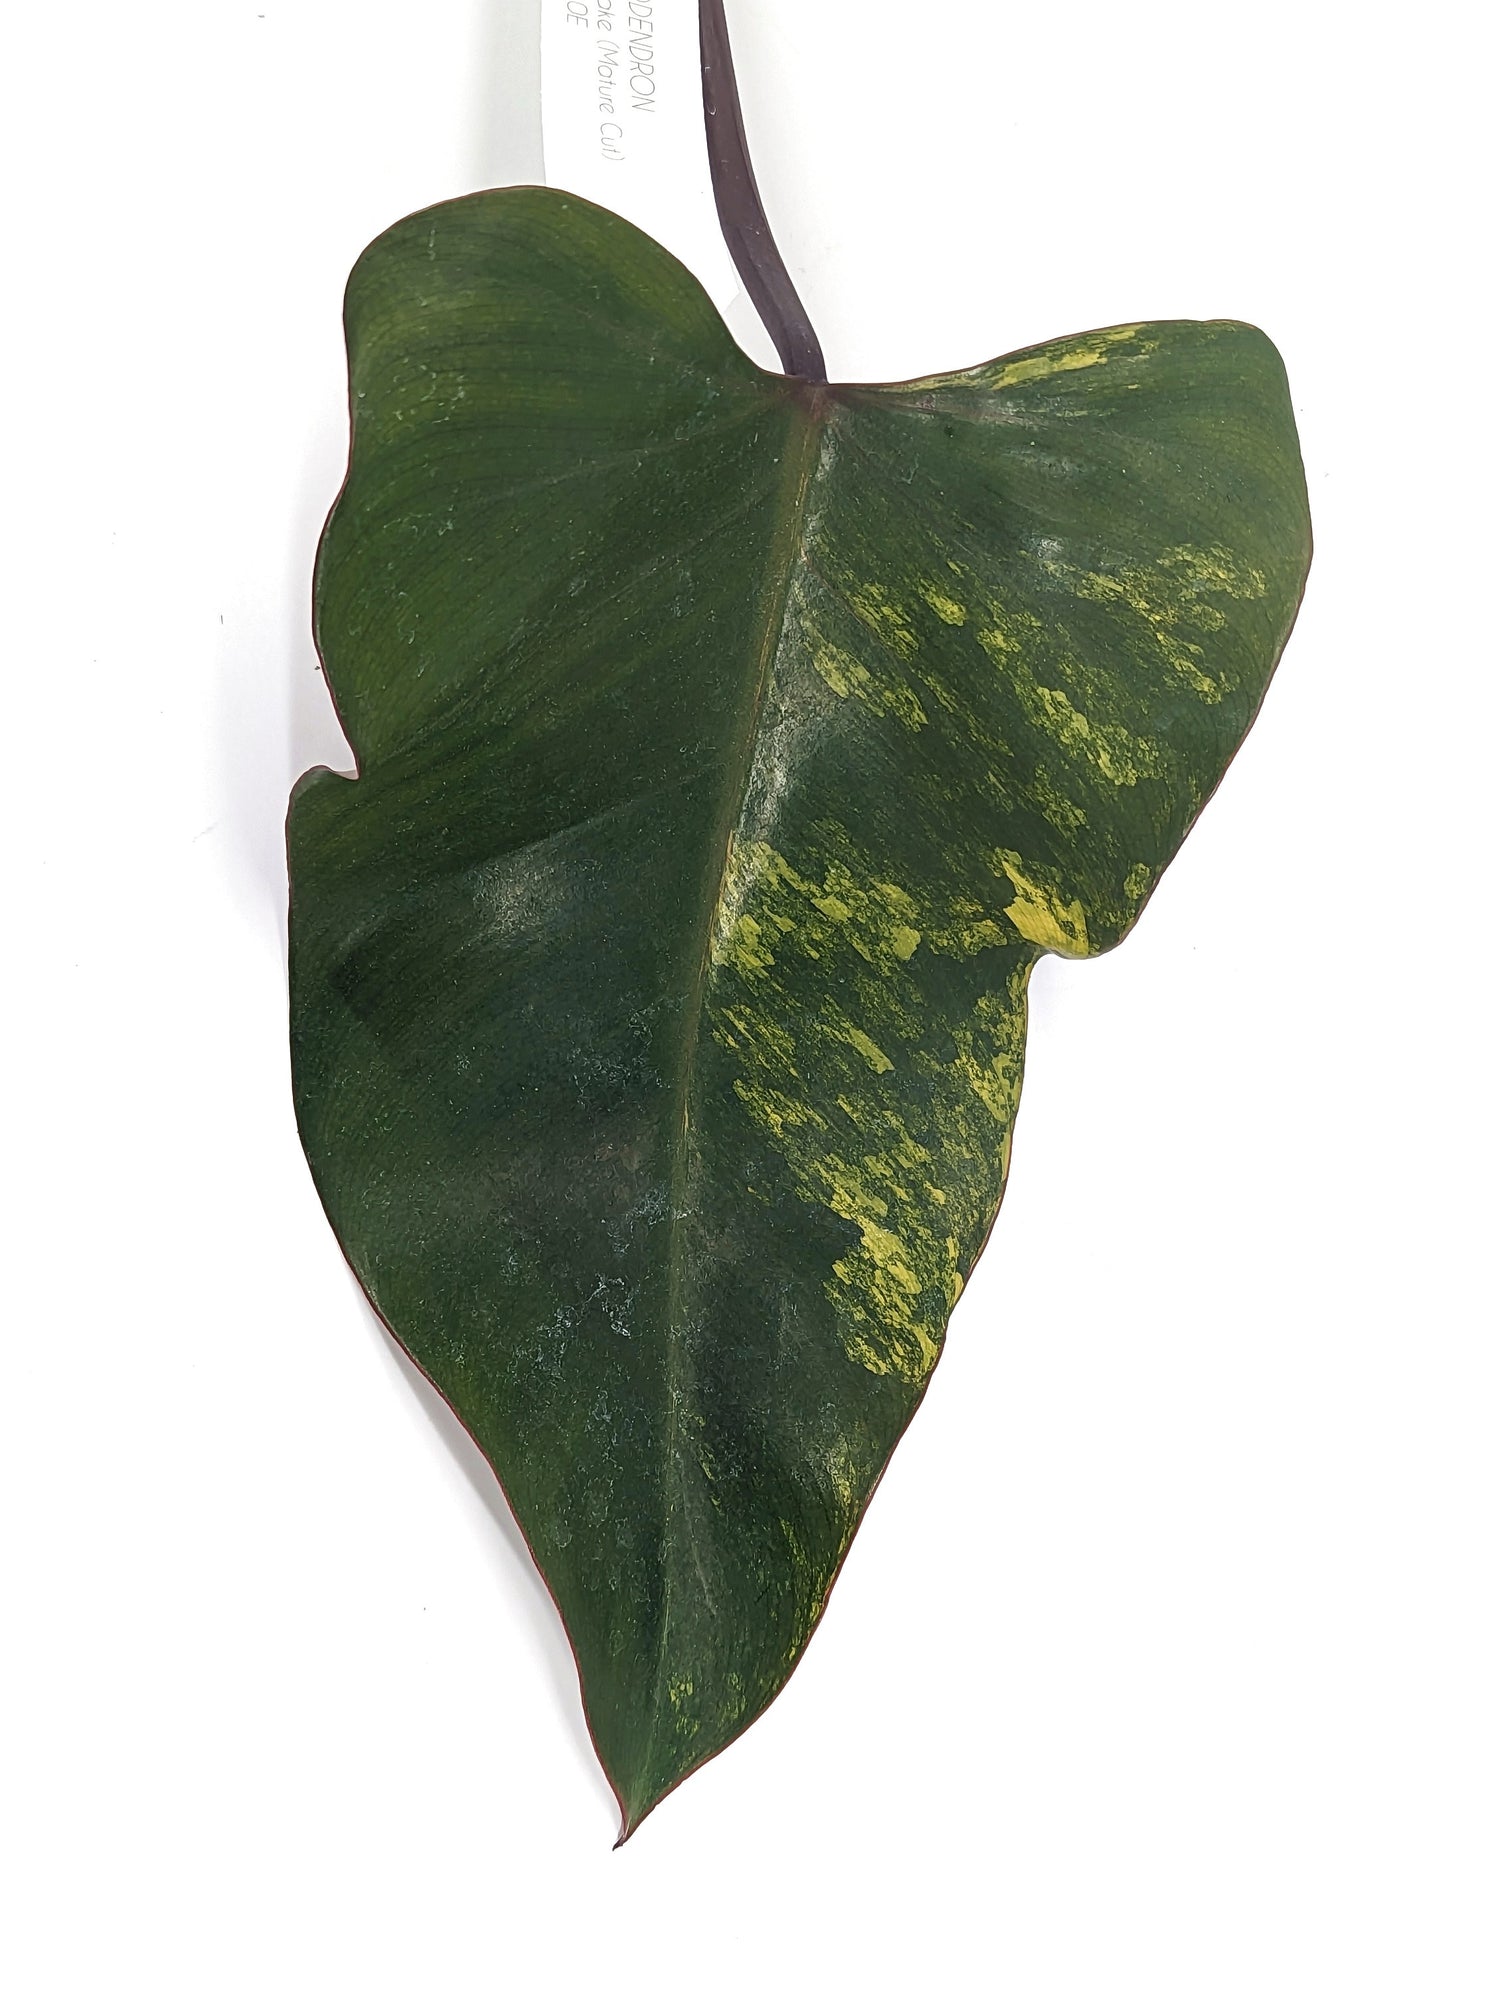 Strawberry Shake Philodendron Cuttings of Mature Leaves XL Size - Exact Pictured